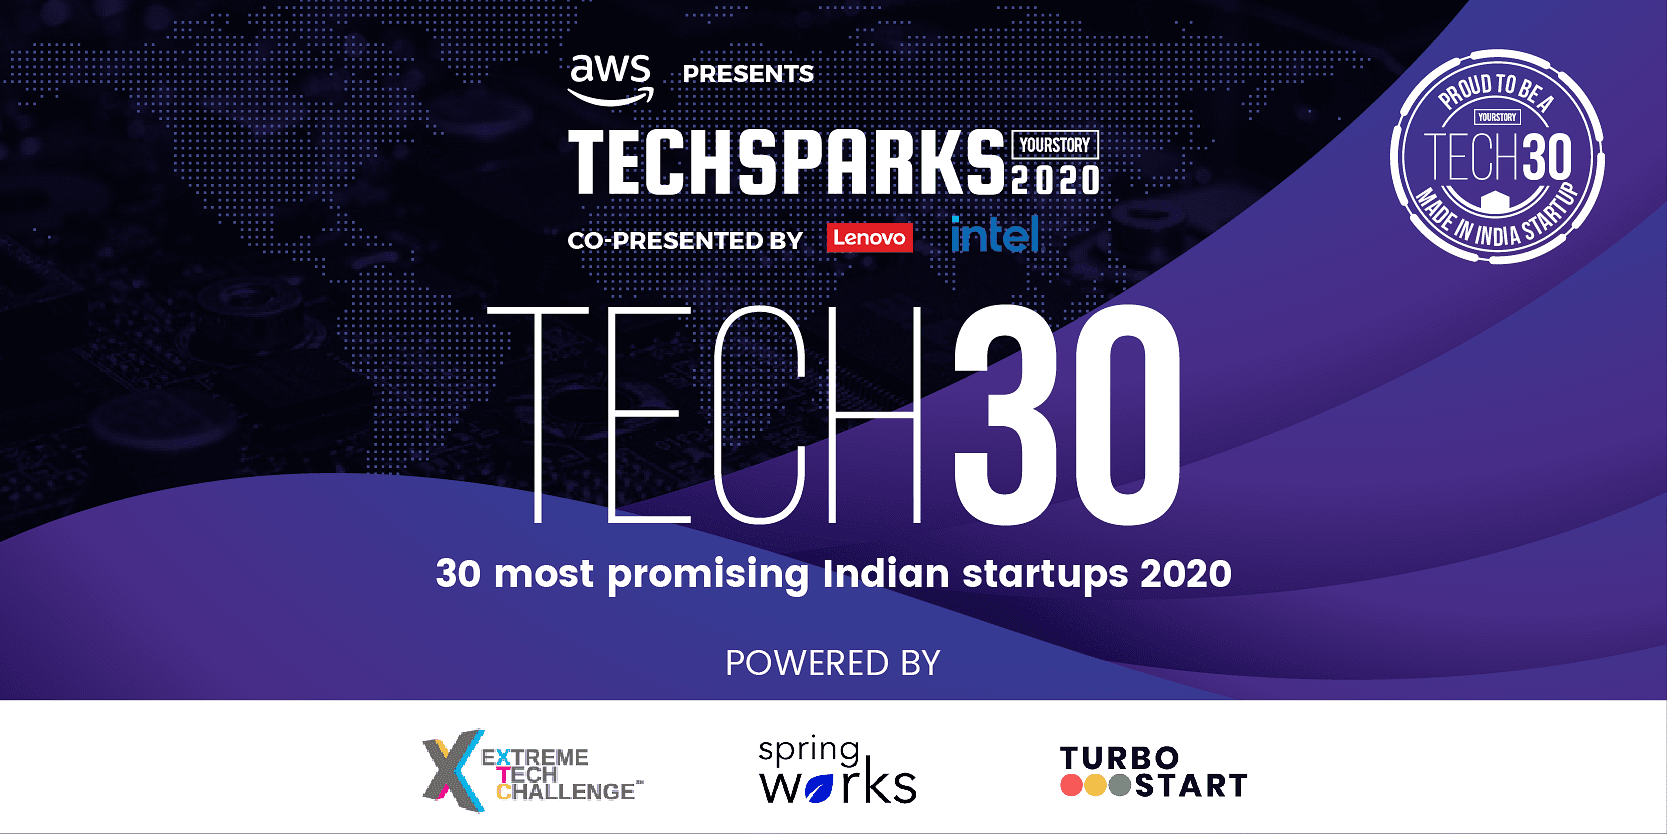 YourStory unveils Tech30 2020; Ratan Tata delivers closing keynote at TechSparks